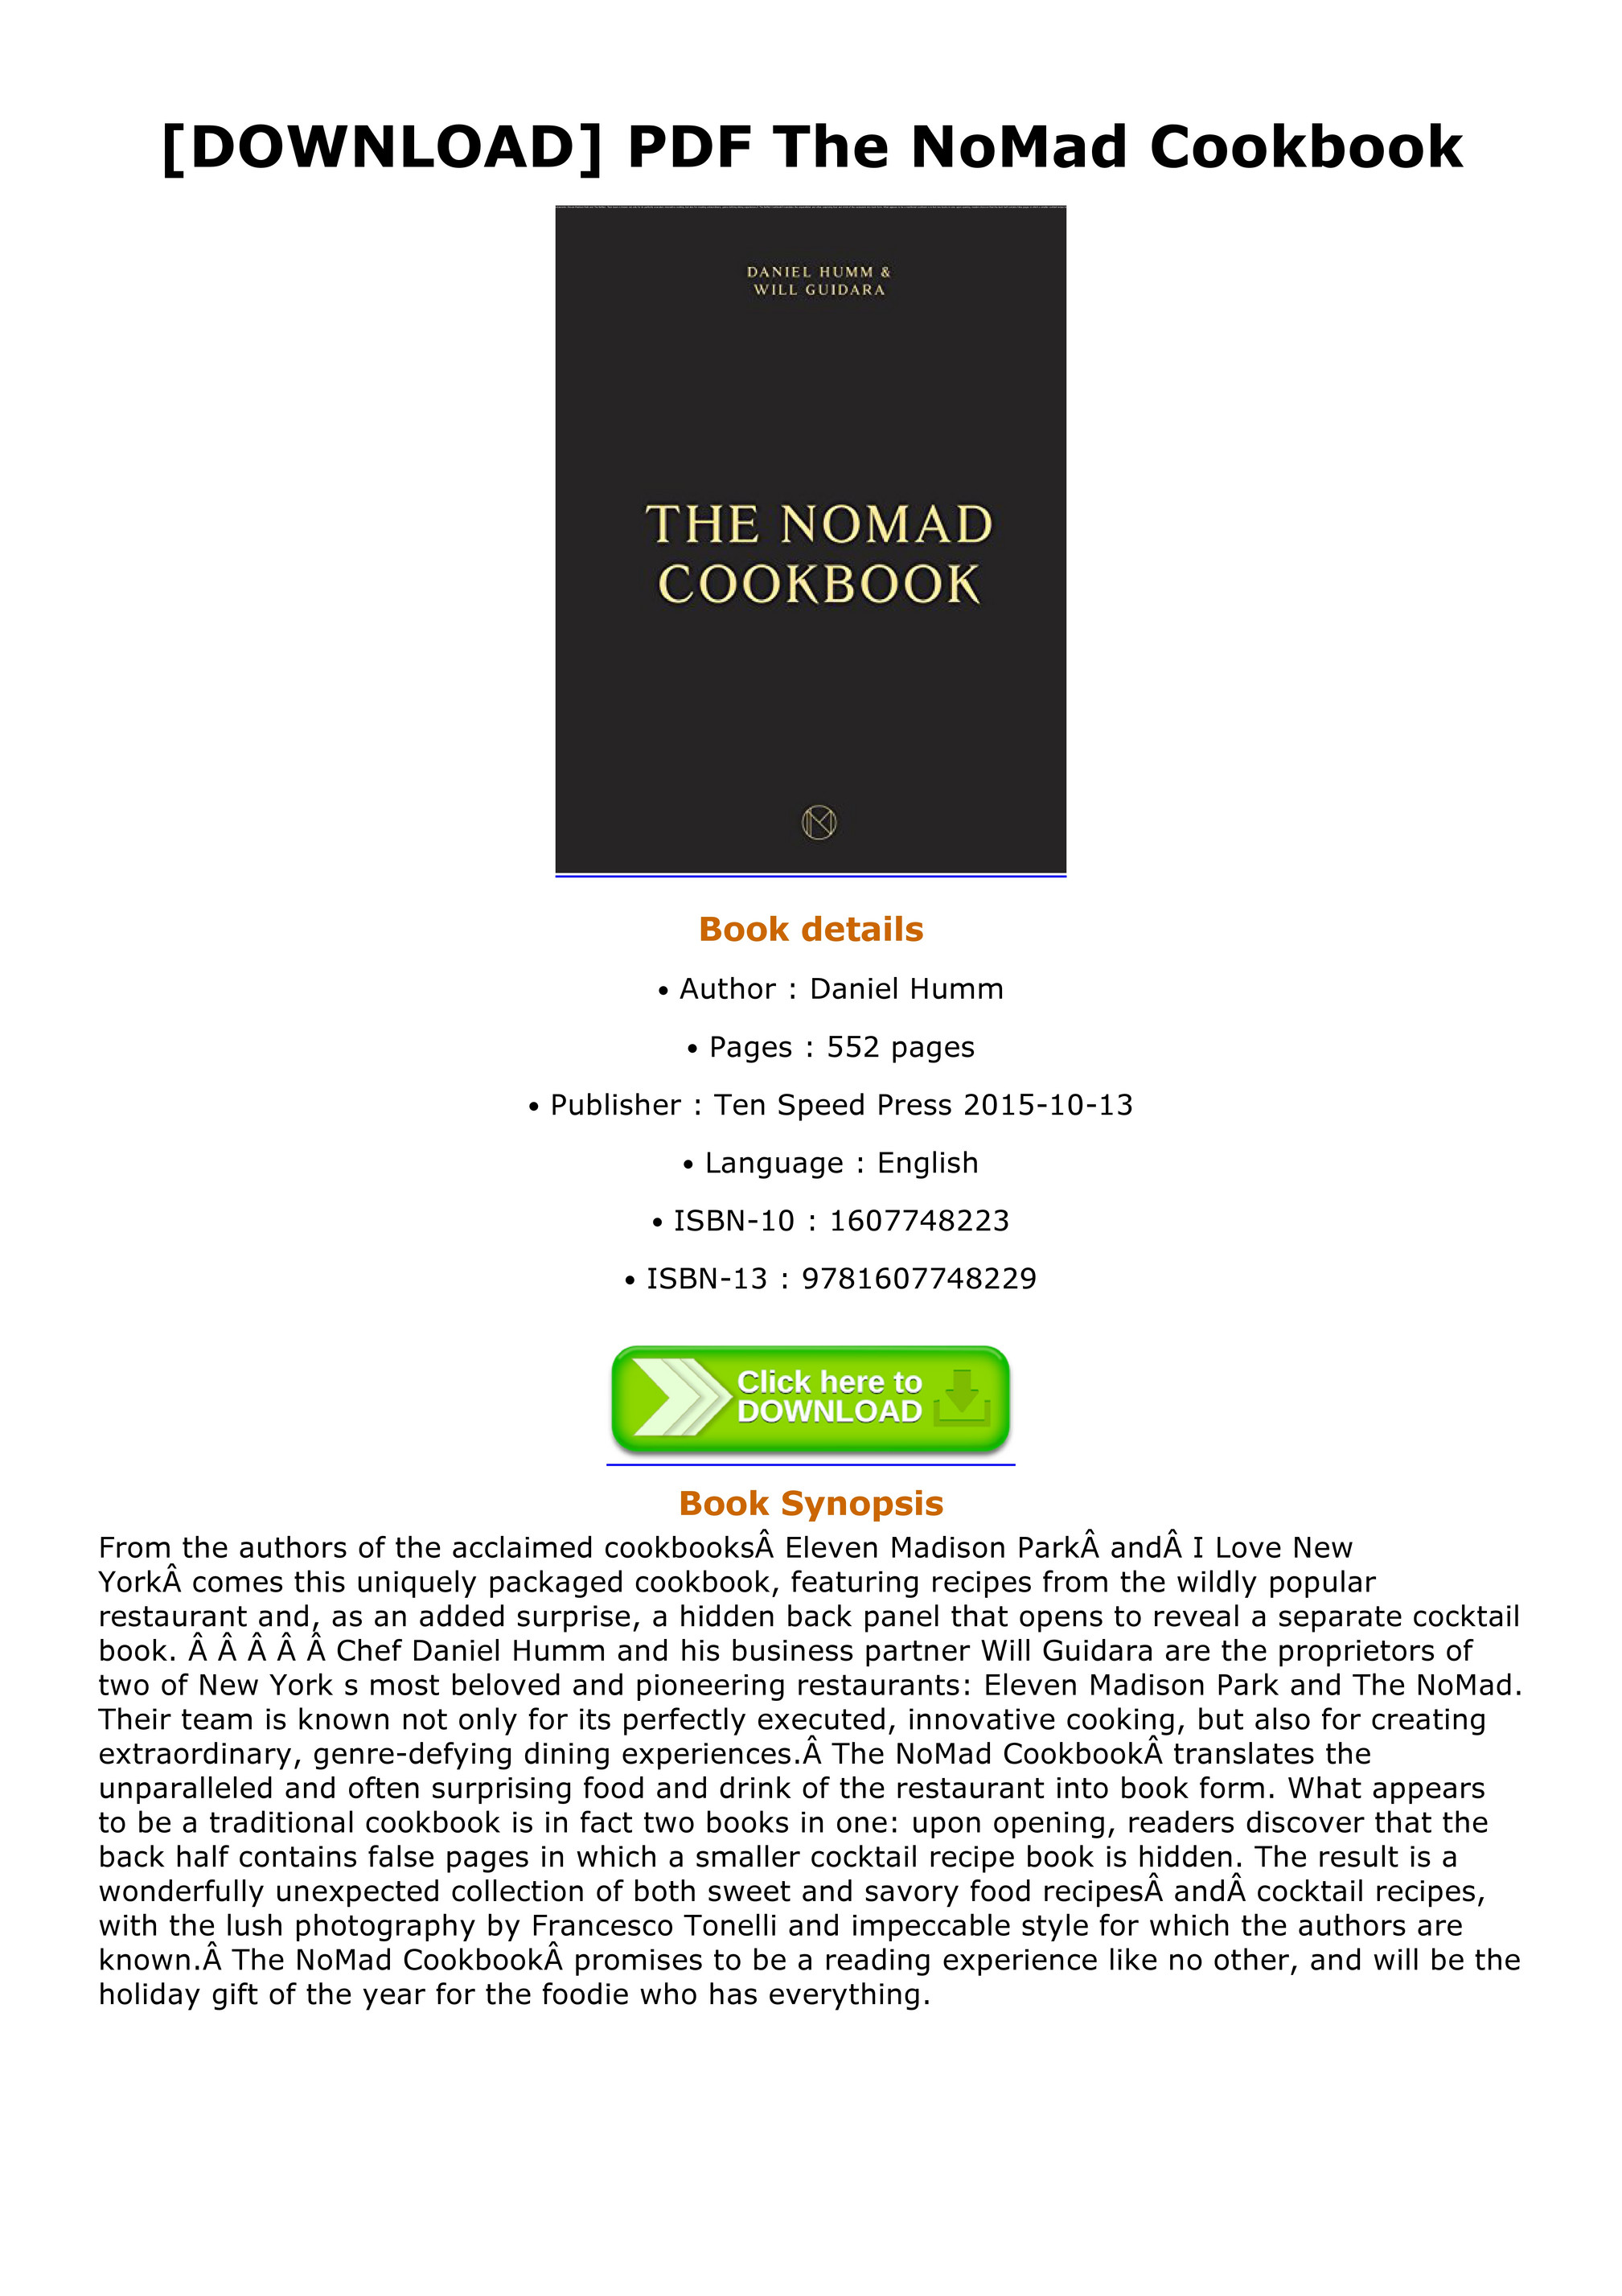 aBOOK - DOWNLOAD PDF The NoMad Cookbook - Page 1 - Created